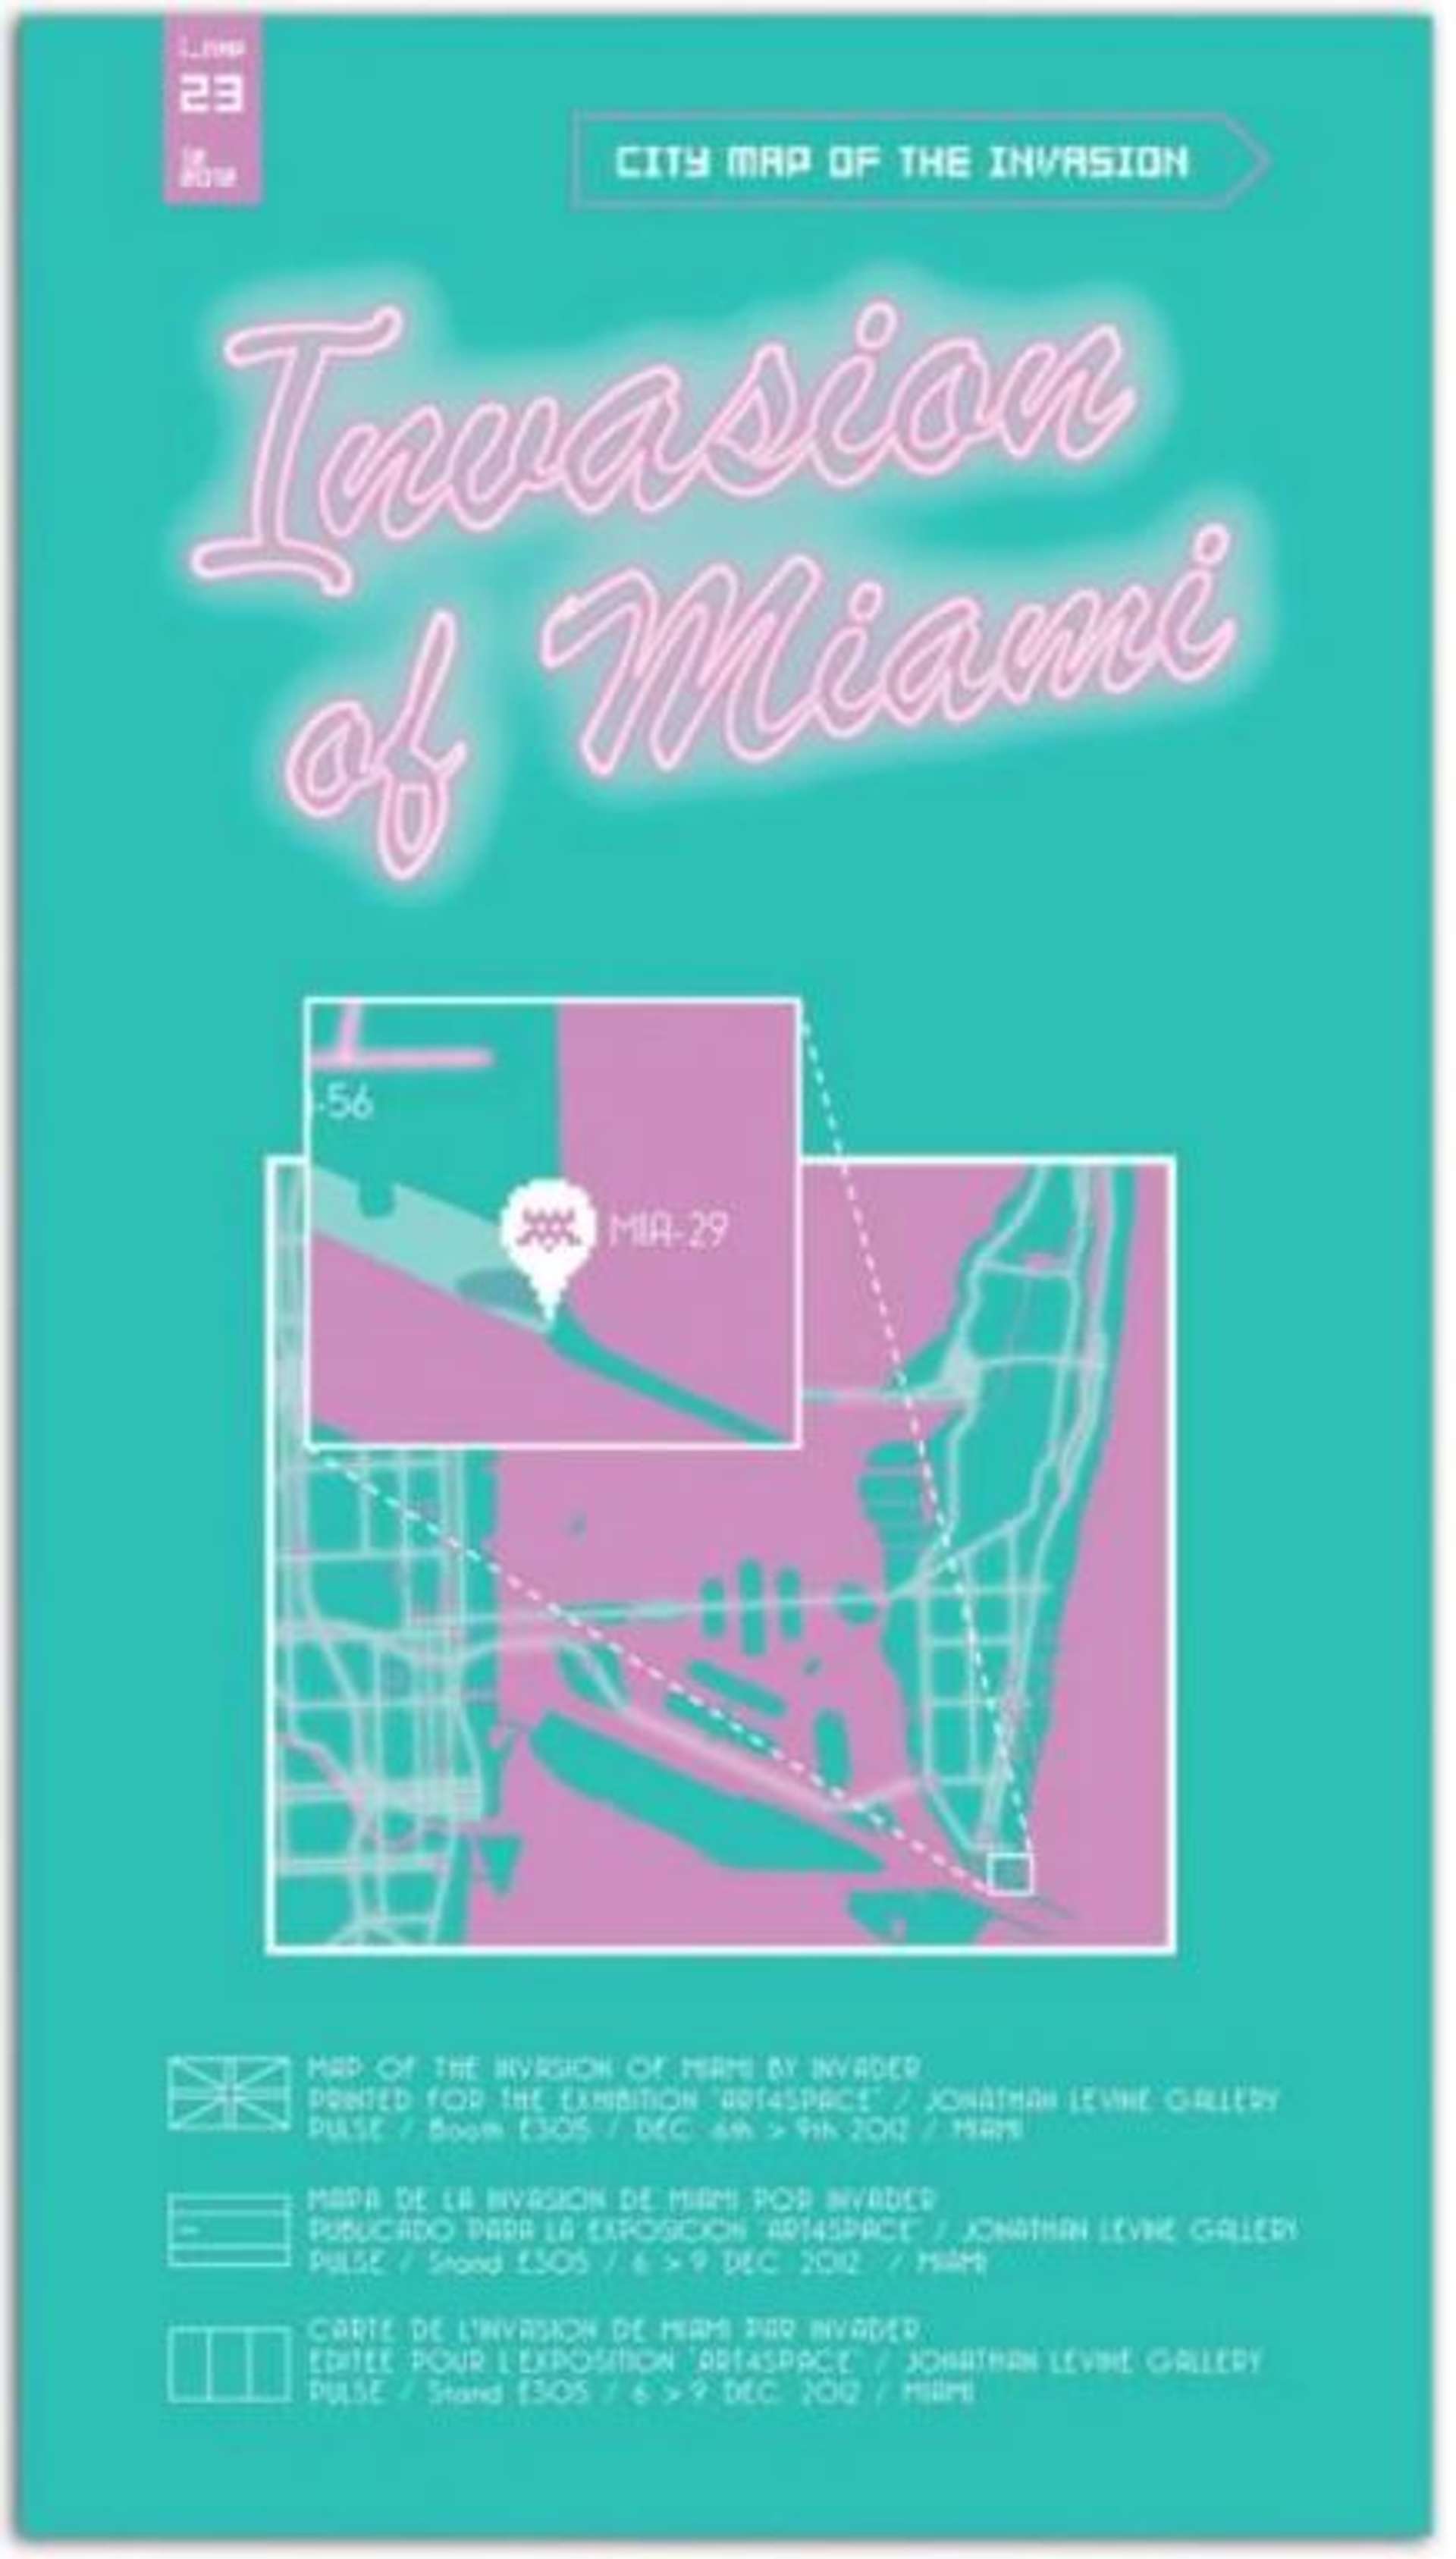 Neon pink sign that reads “Invasion of Miami” above pink-outlined map of Miami against a teal background